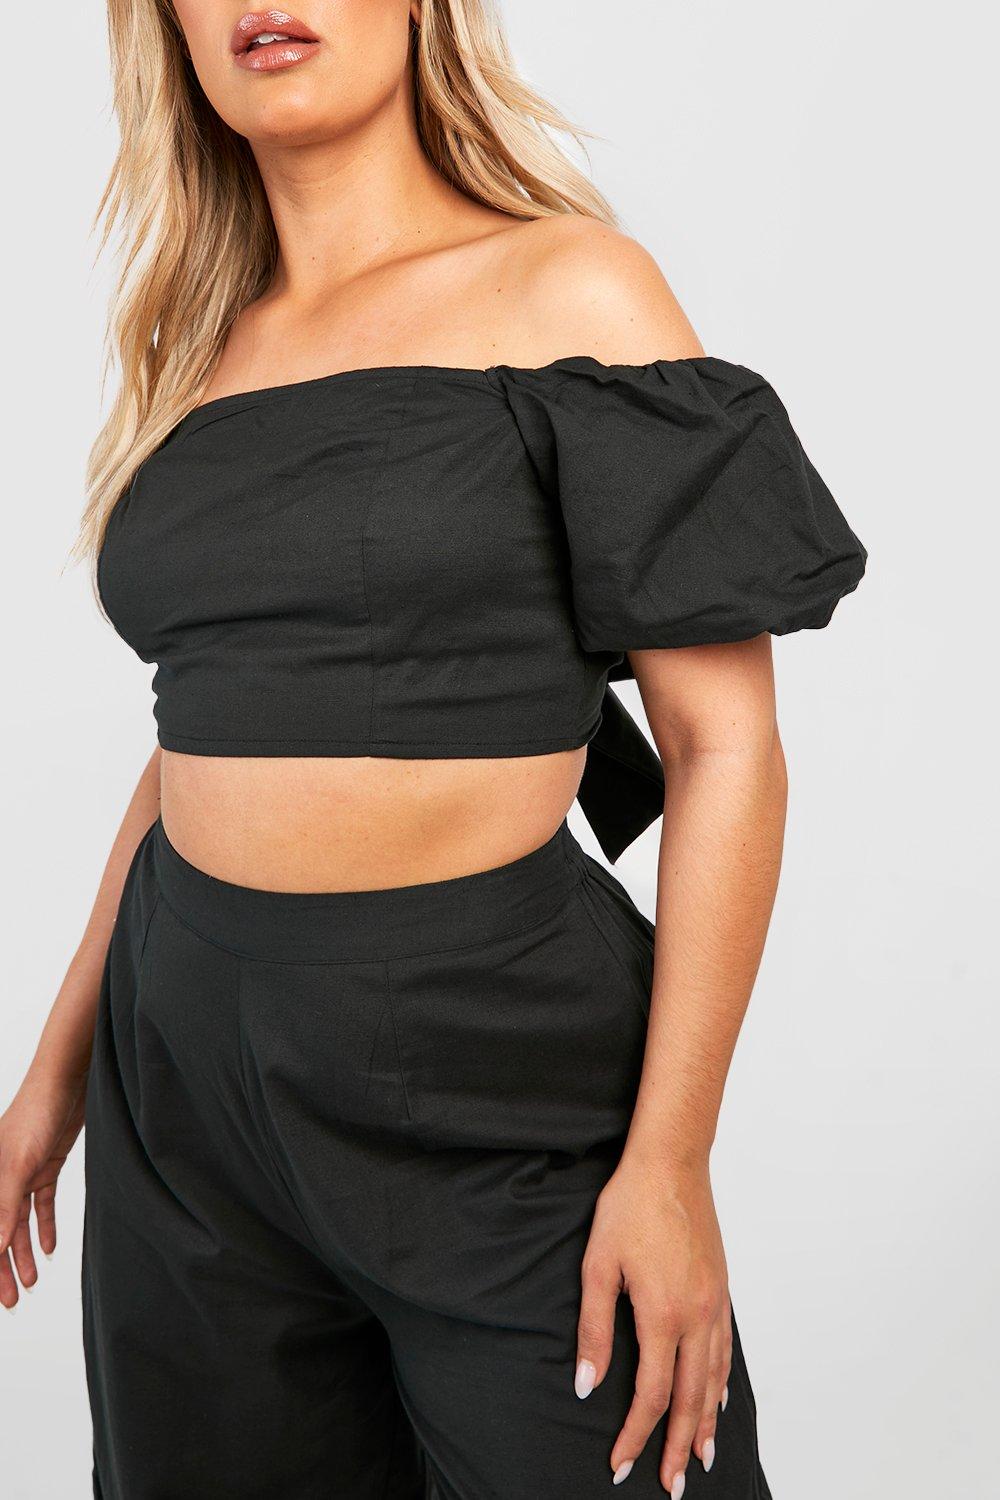 Lionel Green Street Fjern Sæbe Plus Cotton Off Shoulder Top & Pants Two-Piece | boohoo